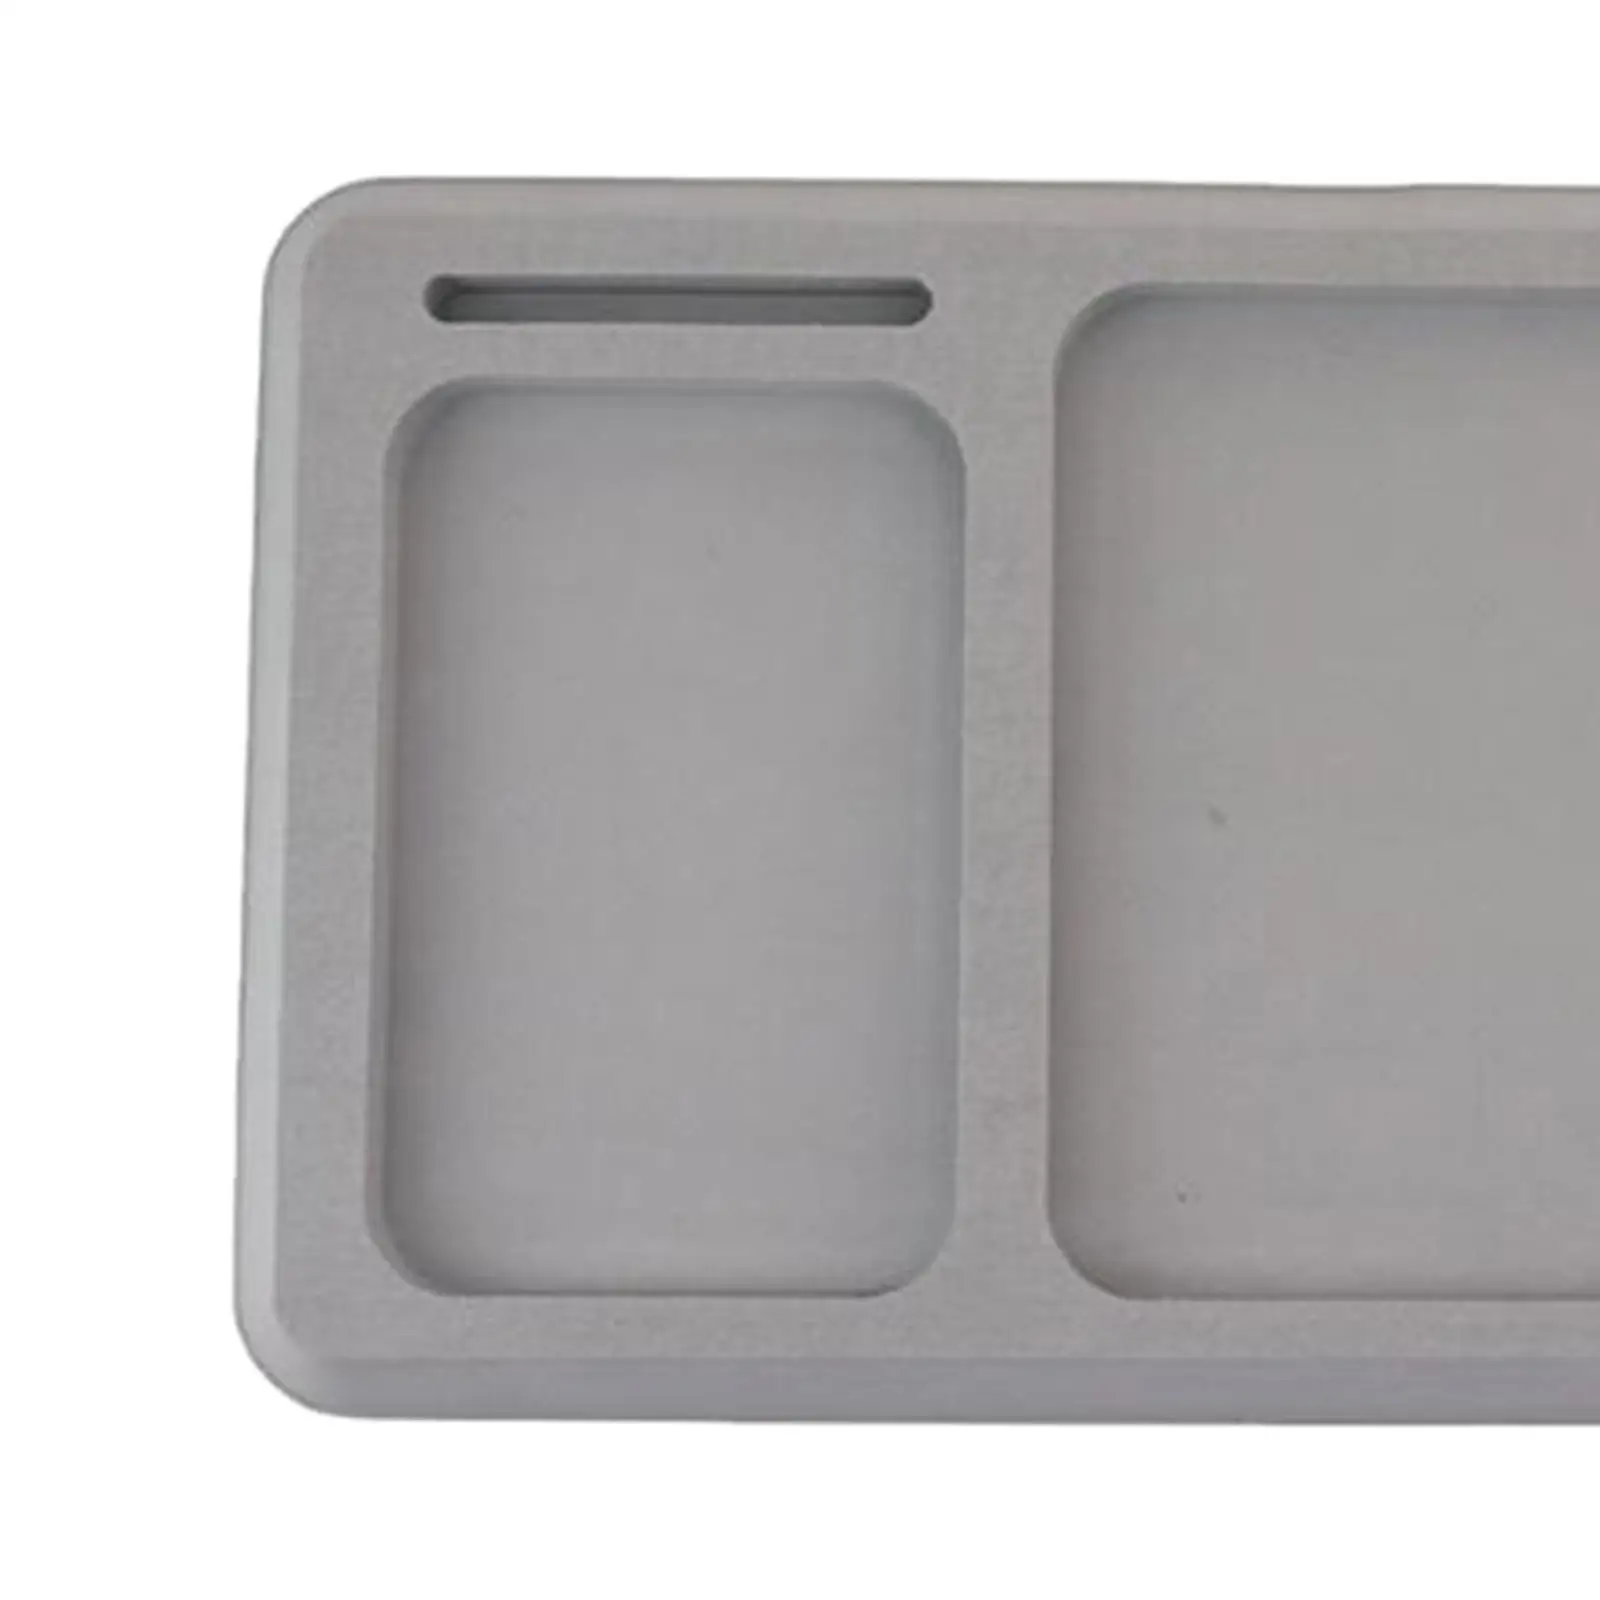 Phone Boat Dash Anti Skid Easy to Install Spare Multifunction Supplies Tray Box